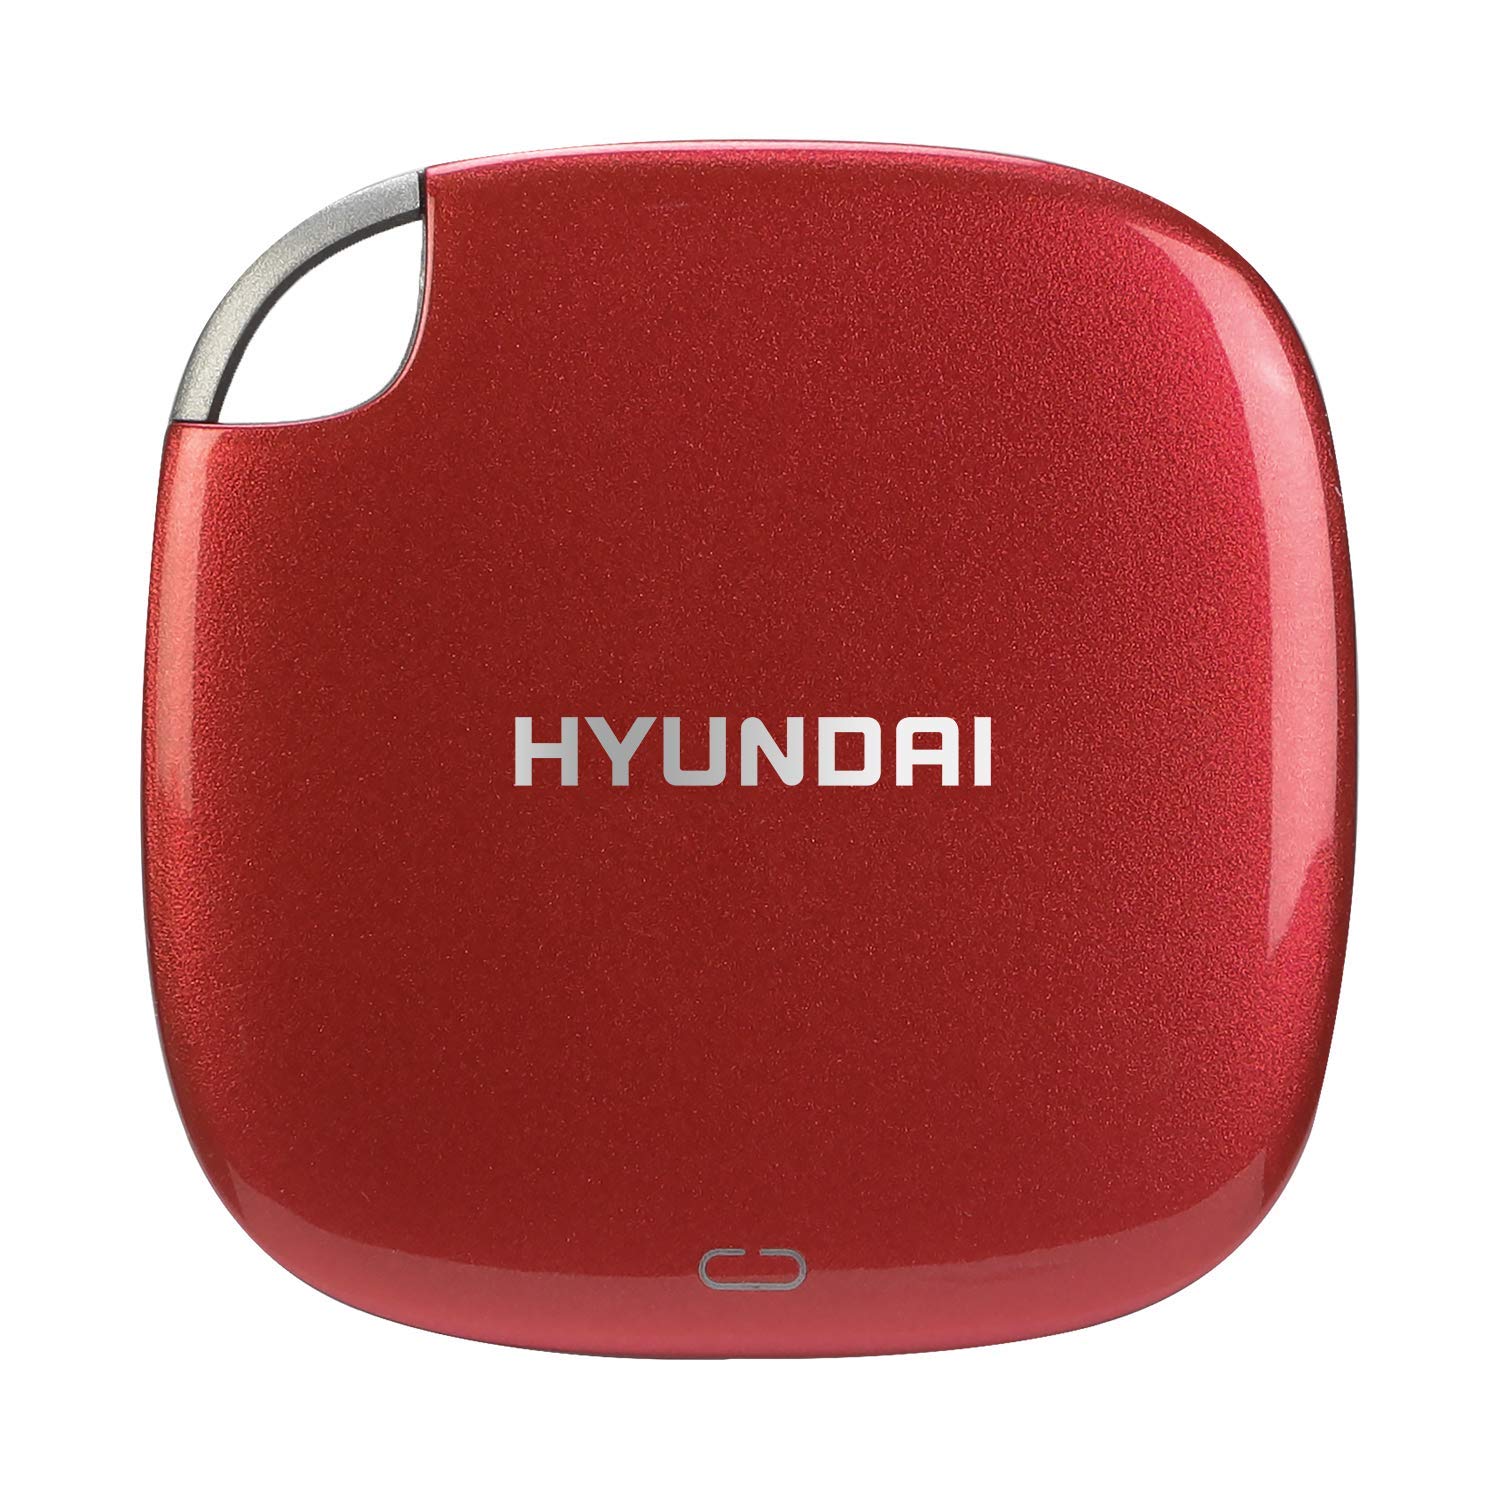 Hyundai 512GB Ultra-Portable Data Storage, Fast External SSD, PC/MAC/Mobile - USB-C to C, USB-A to C, Dual Cable Included, Up to 450MB/s - Gen USB 3.1, Red HTESD500R UPC 810033033223 - HYUNDAI